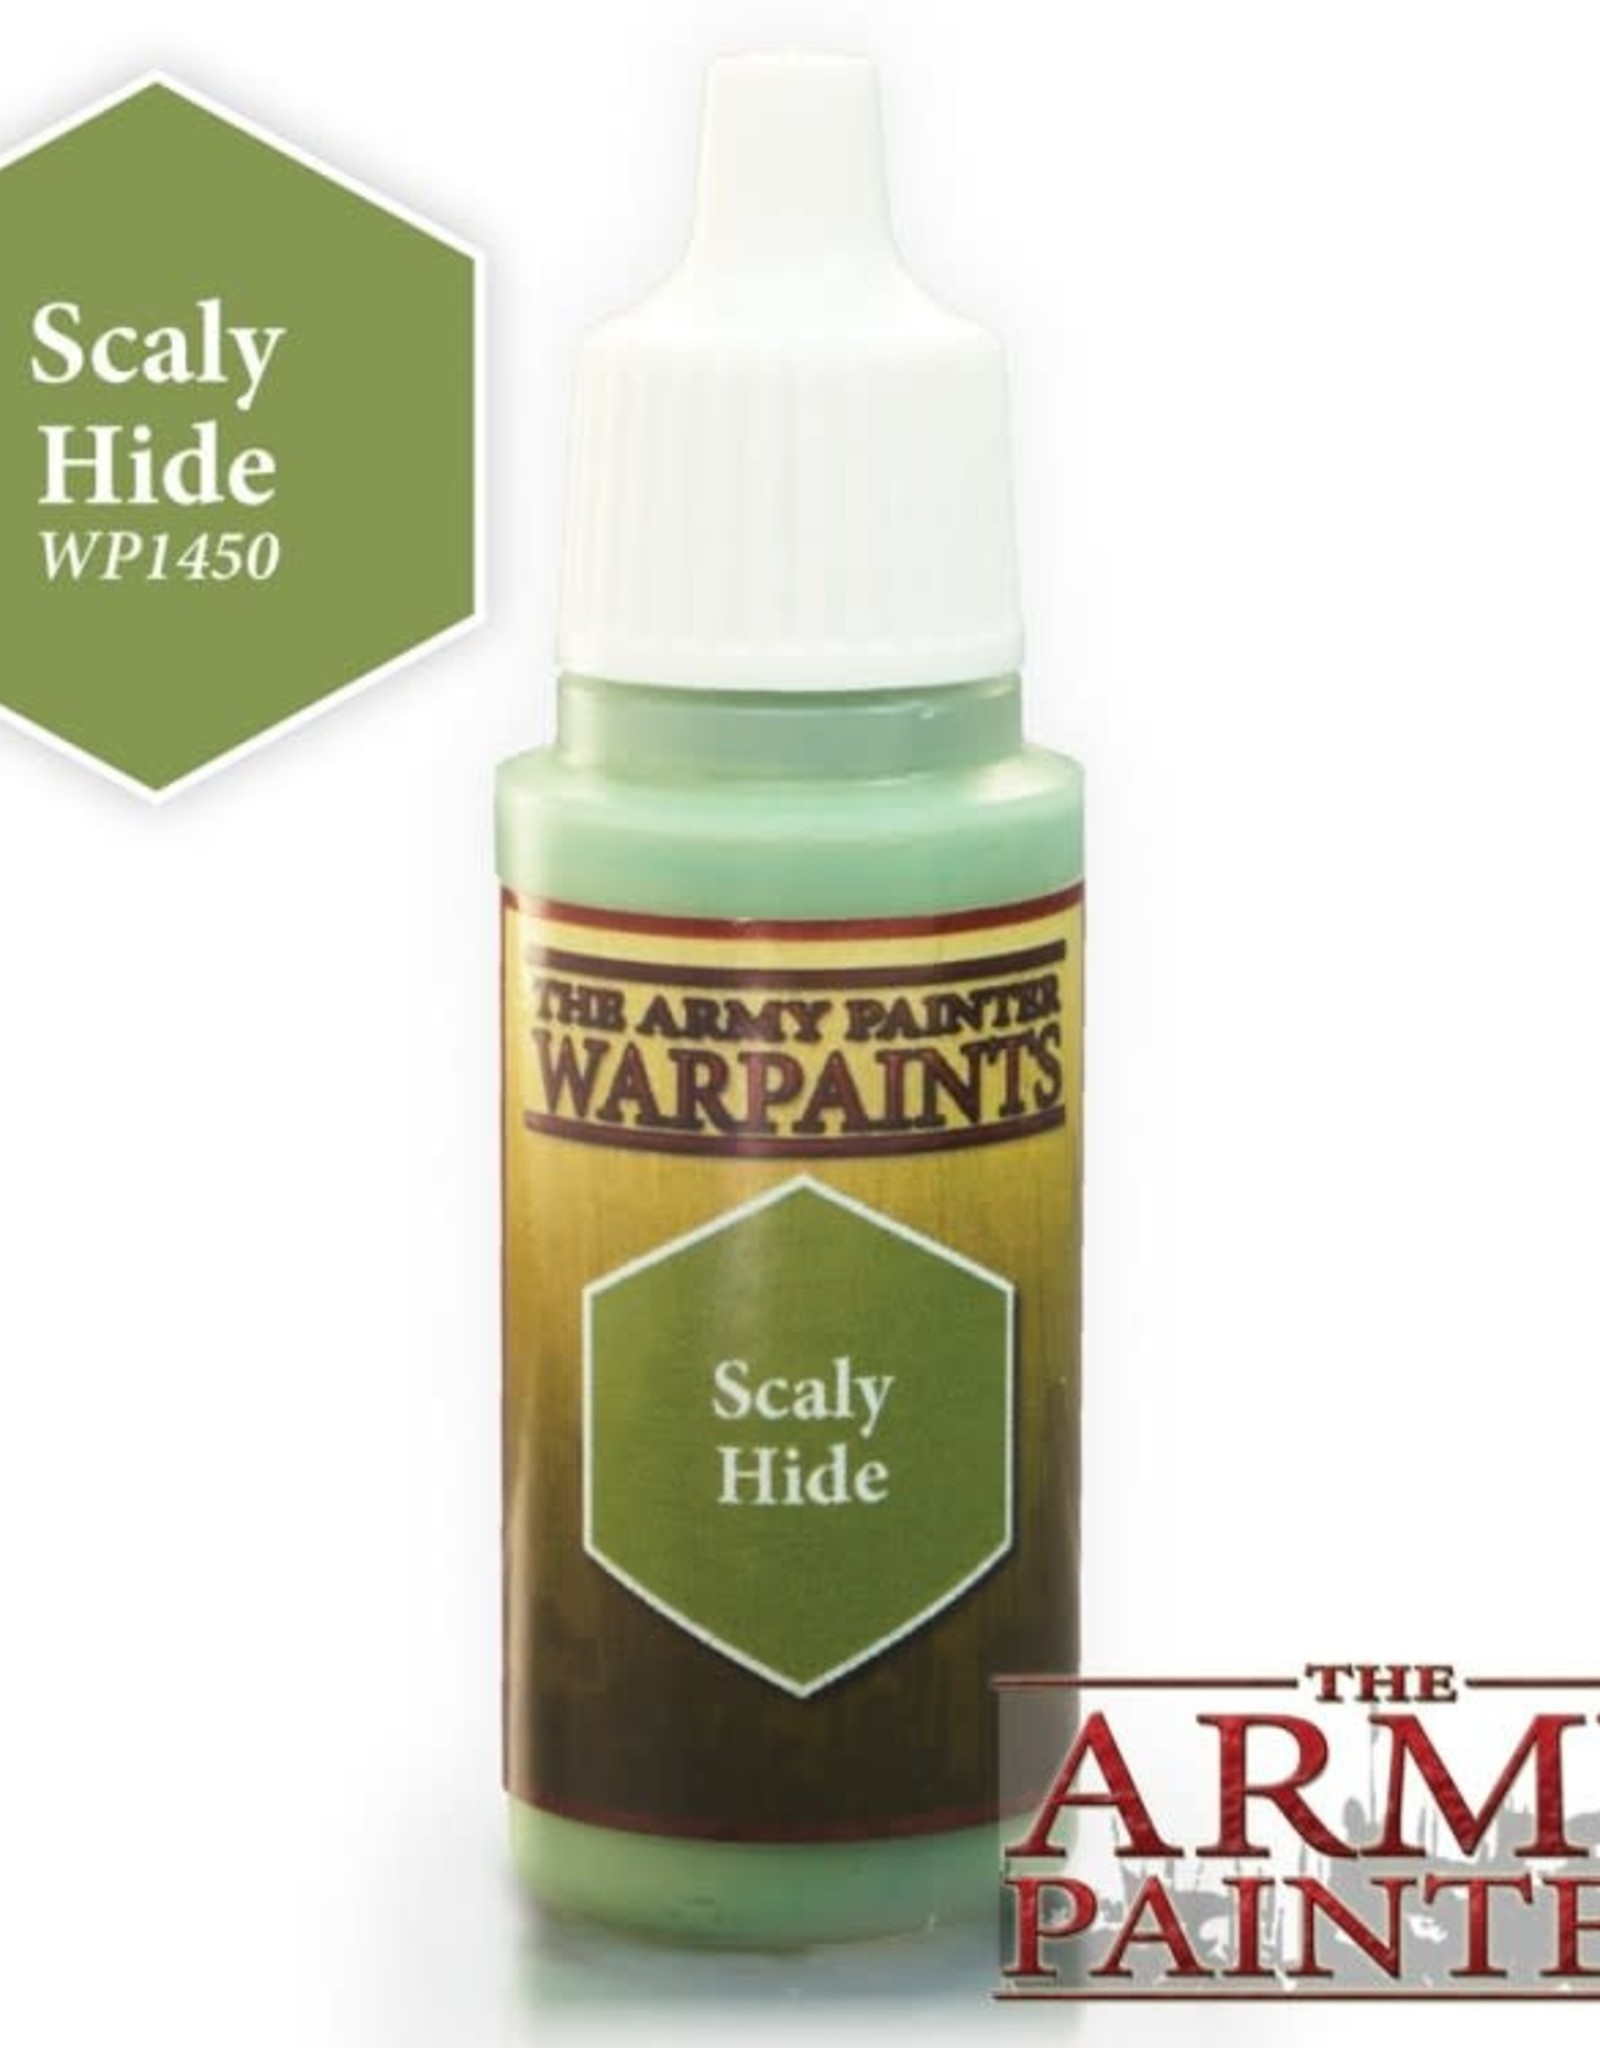 The Army Painter Warpaints - Scaly Hide